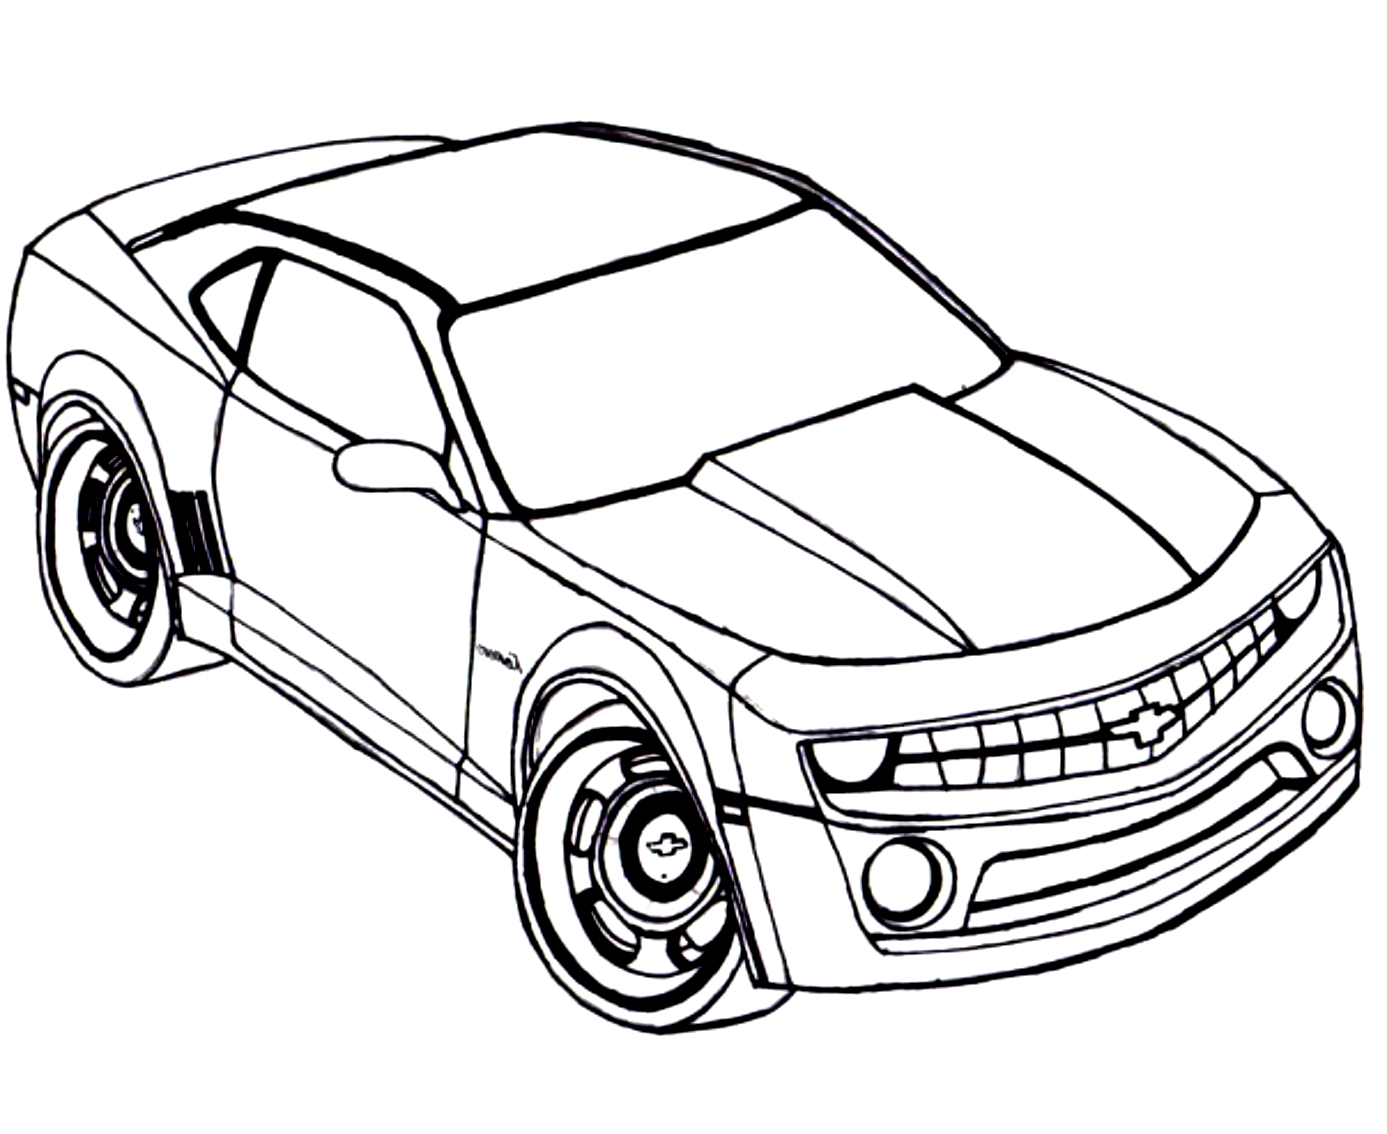 Drawing 6 from Automobiles coloring page to print and coloring